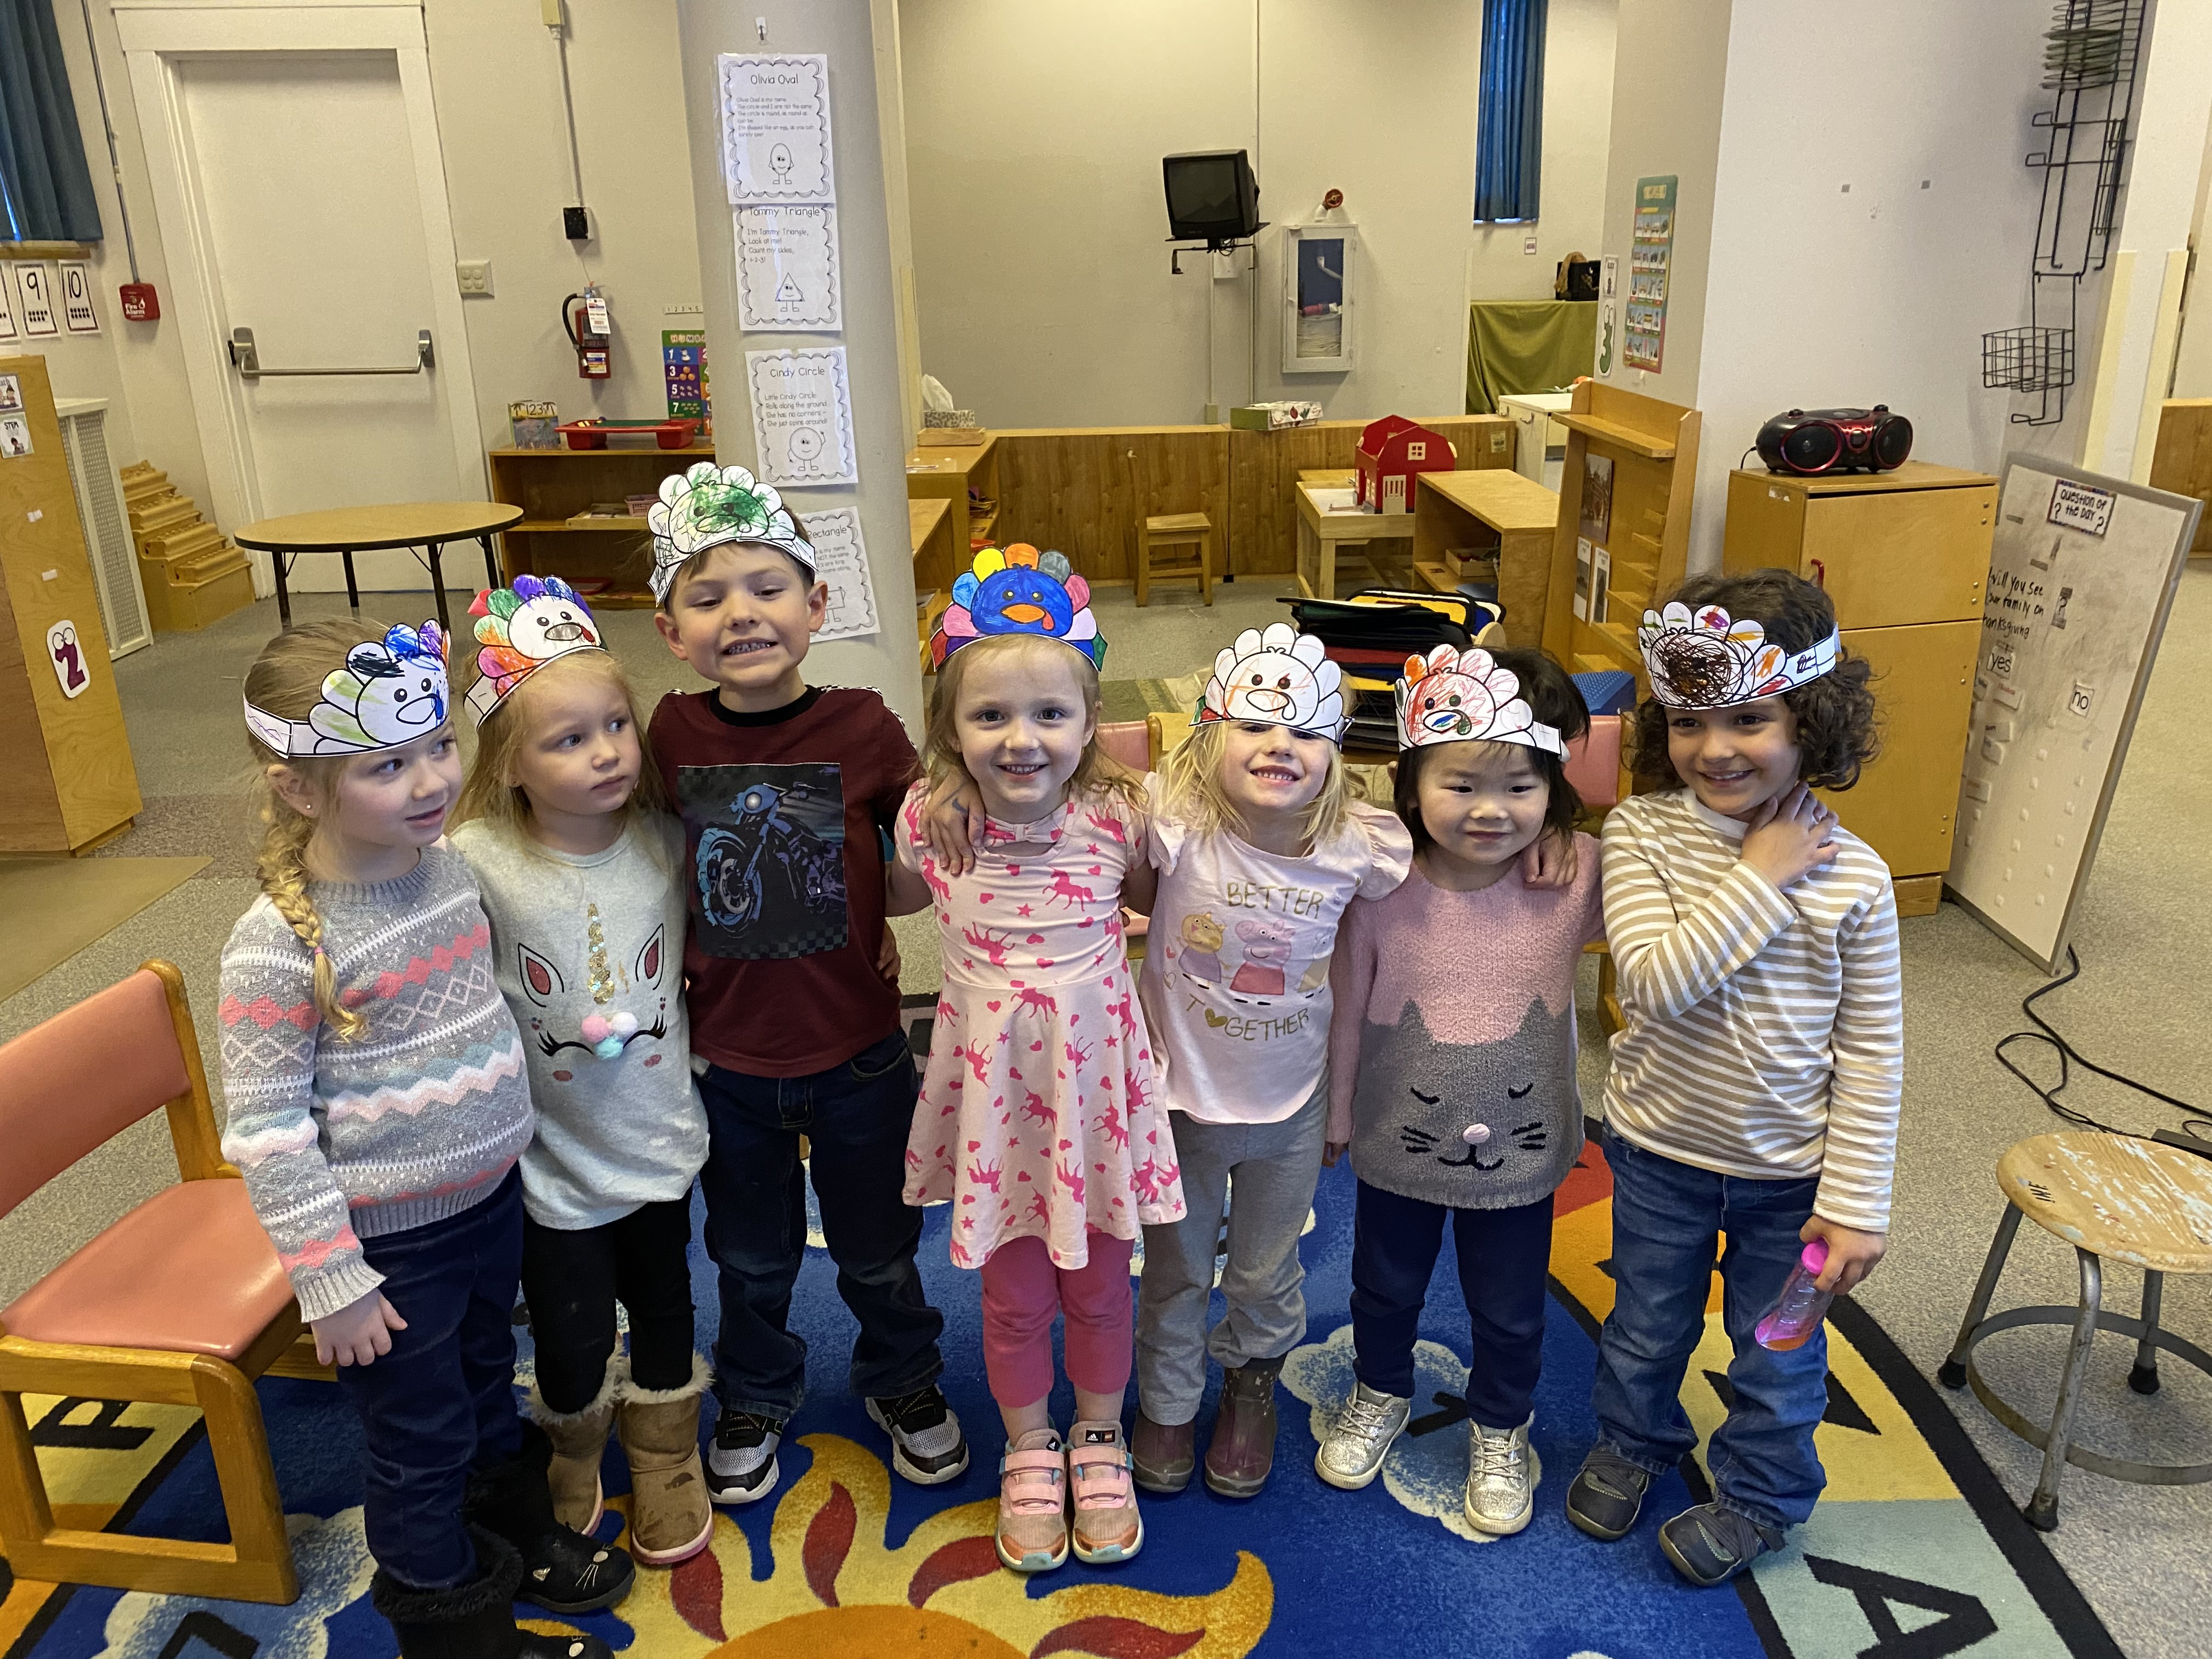 6 children wearing headbands they colored.